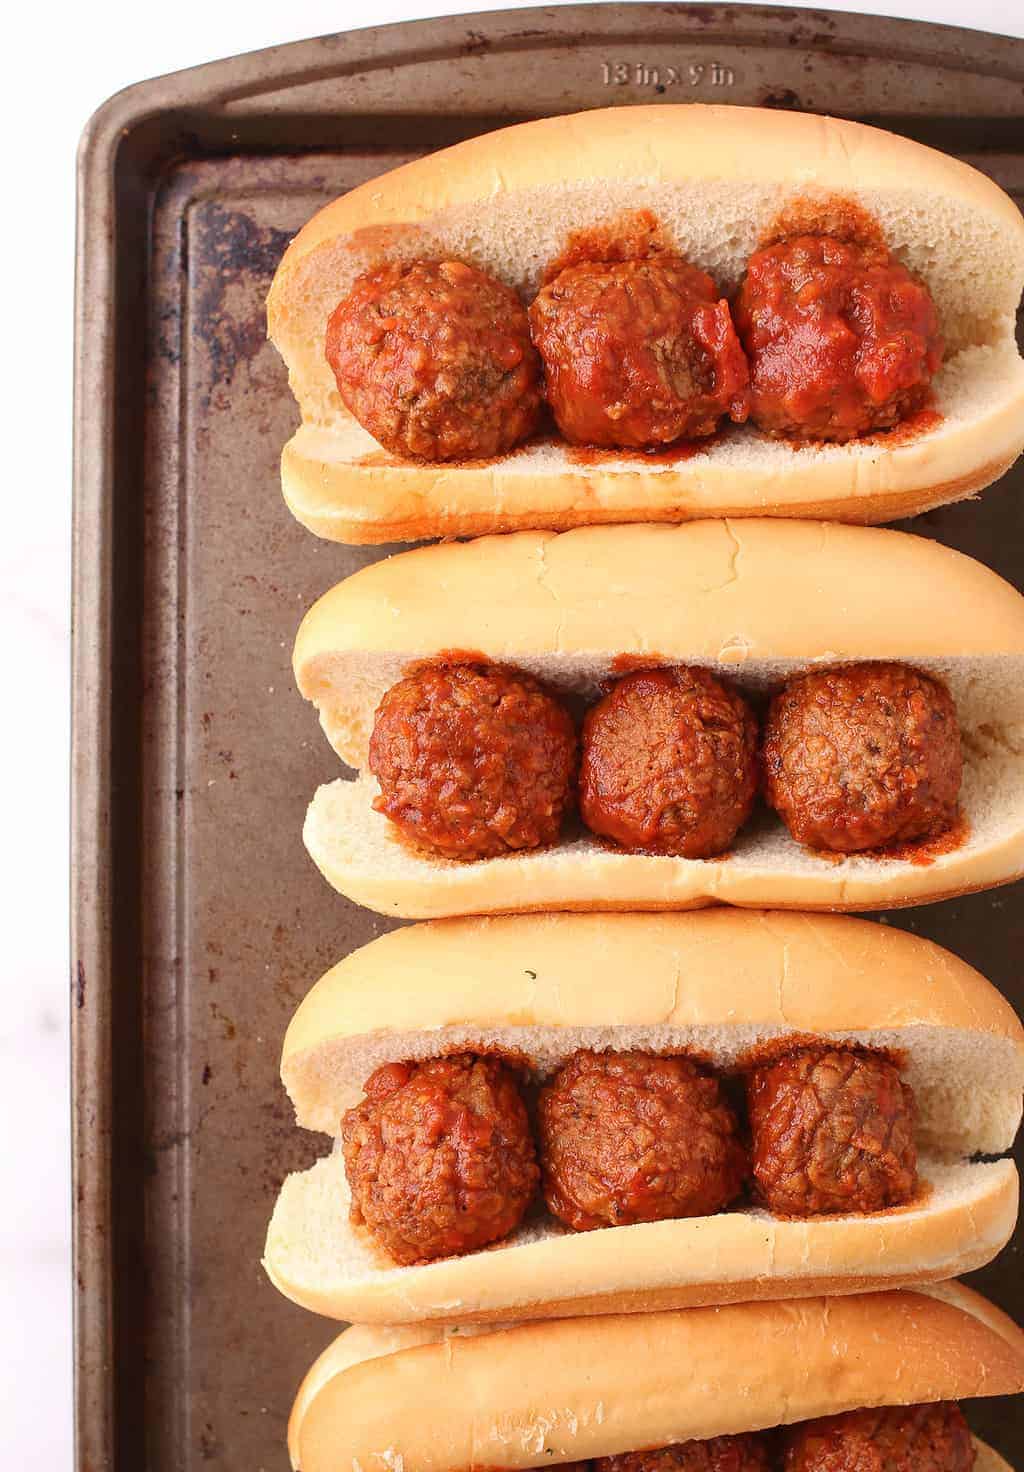 Hoagie rolls filled with meatballs